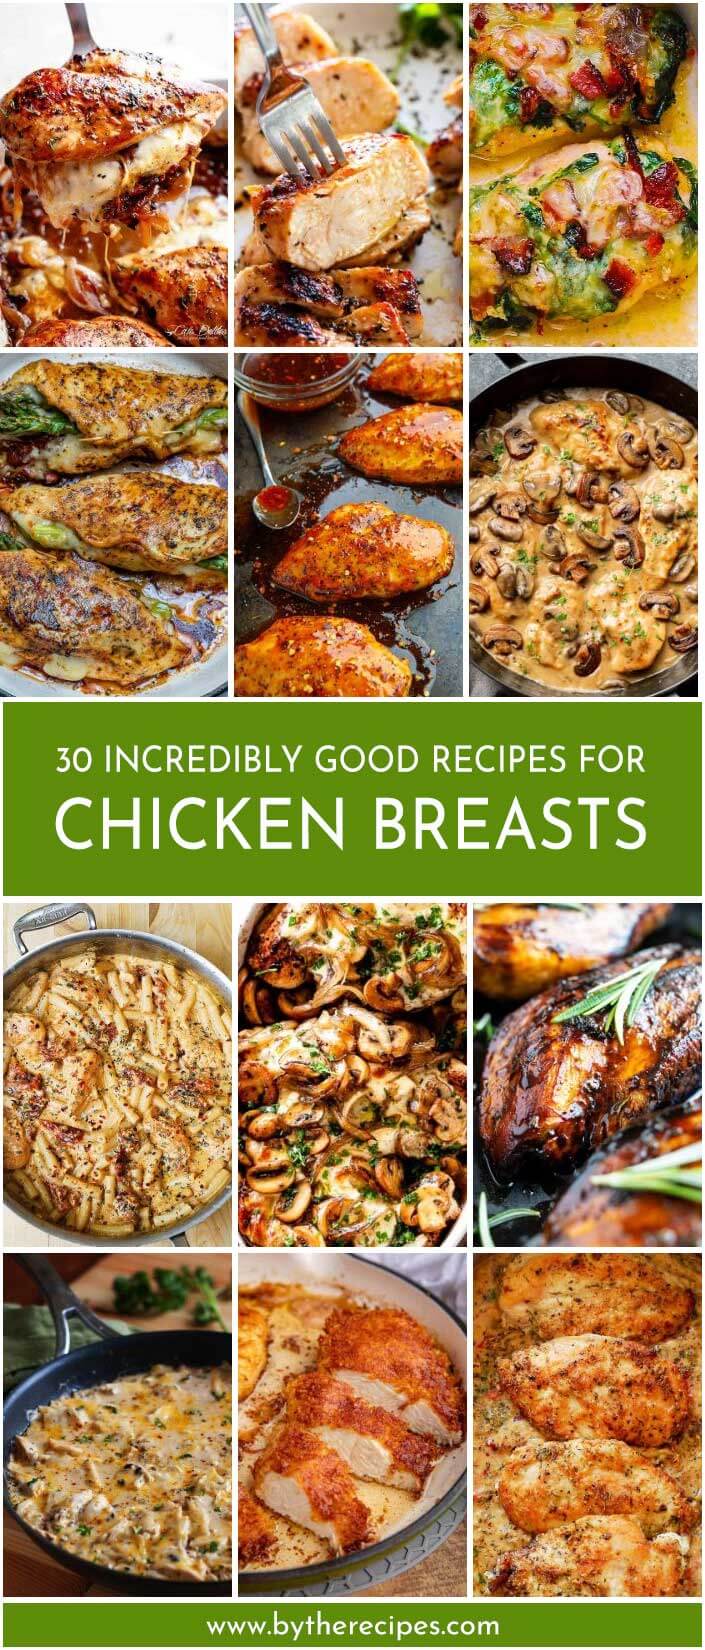 30 Incredibly Good Recipes For Chicken Breasts